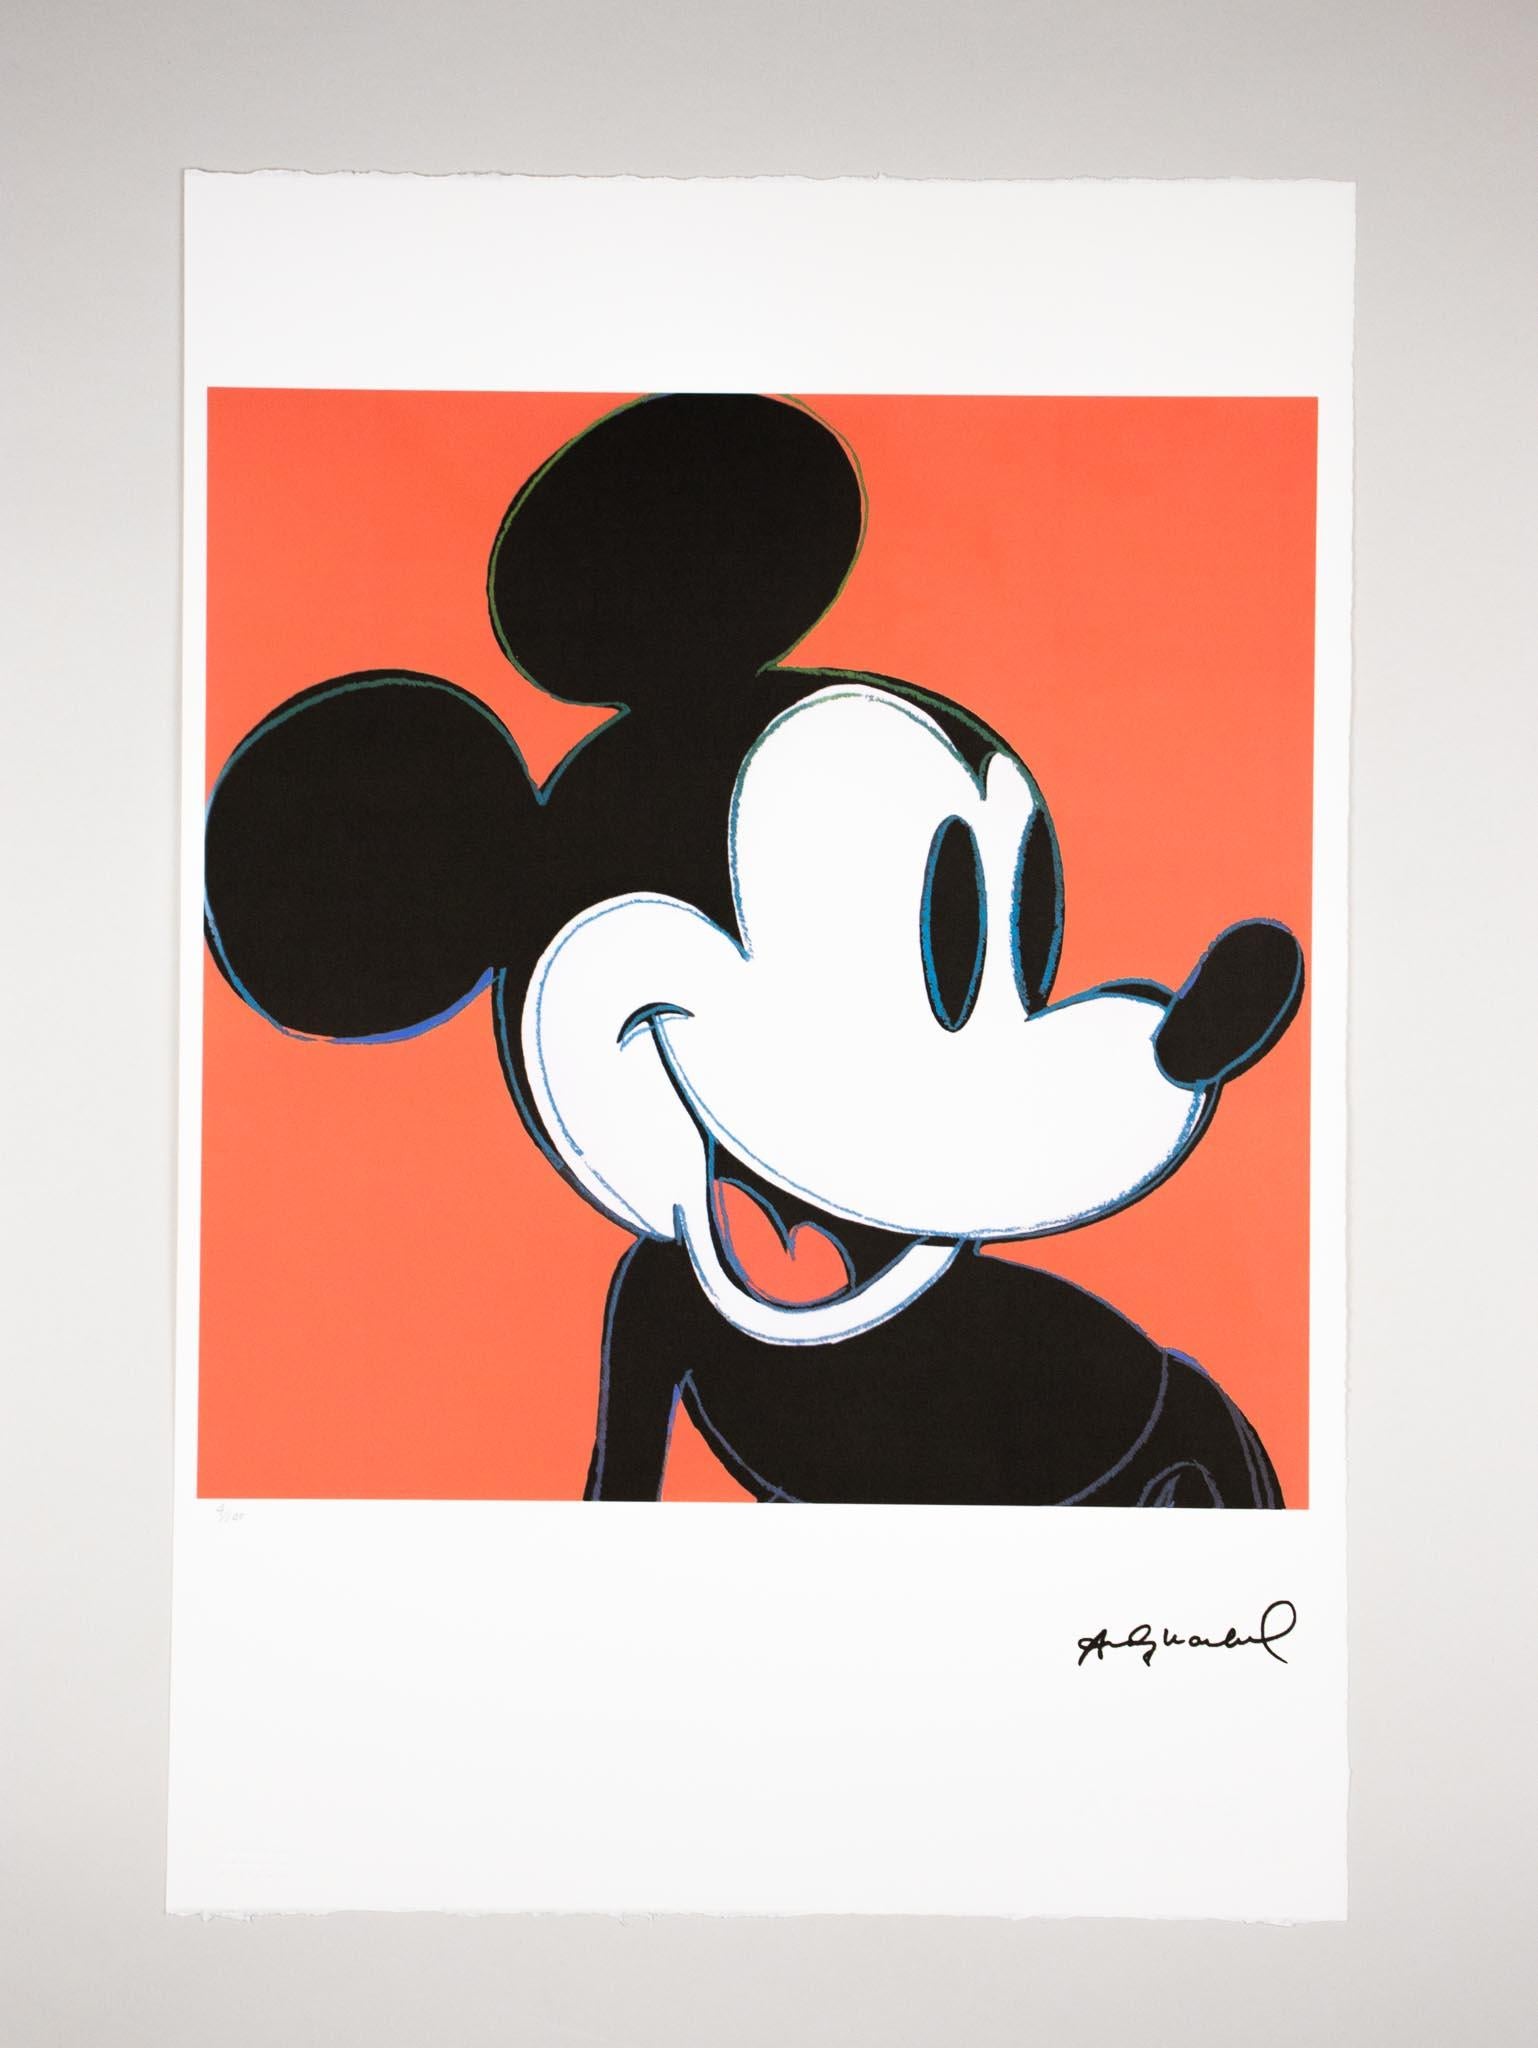 Andy Warhol Portrait Print - Mickey Mouse - 1983 - Original Lithograph - Limited Edition Print - 4/100 pcs.